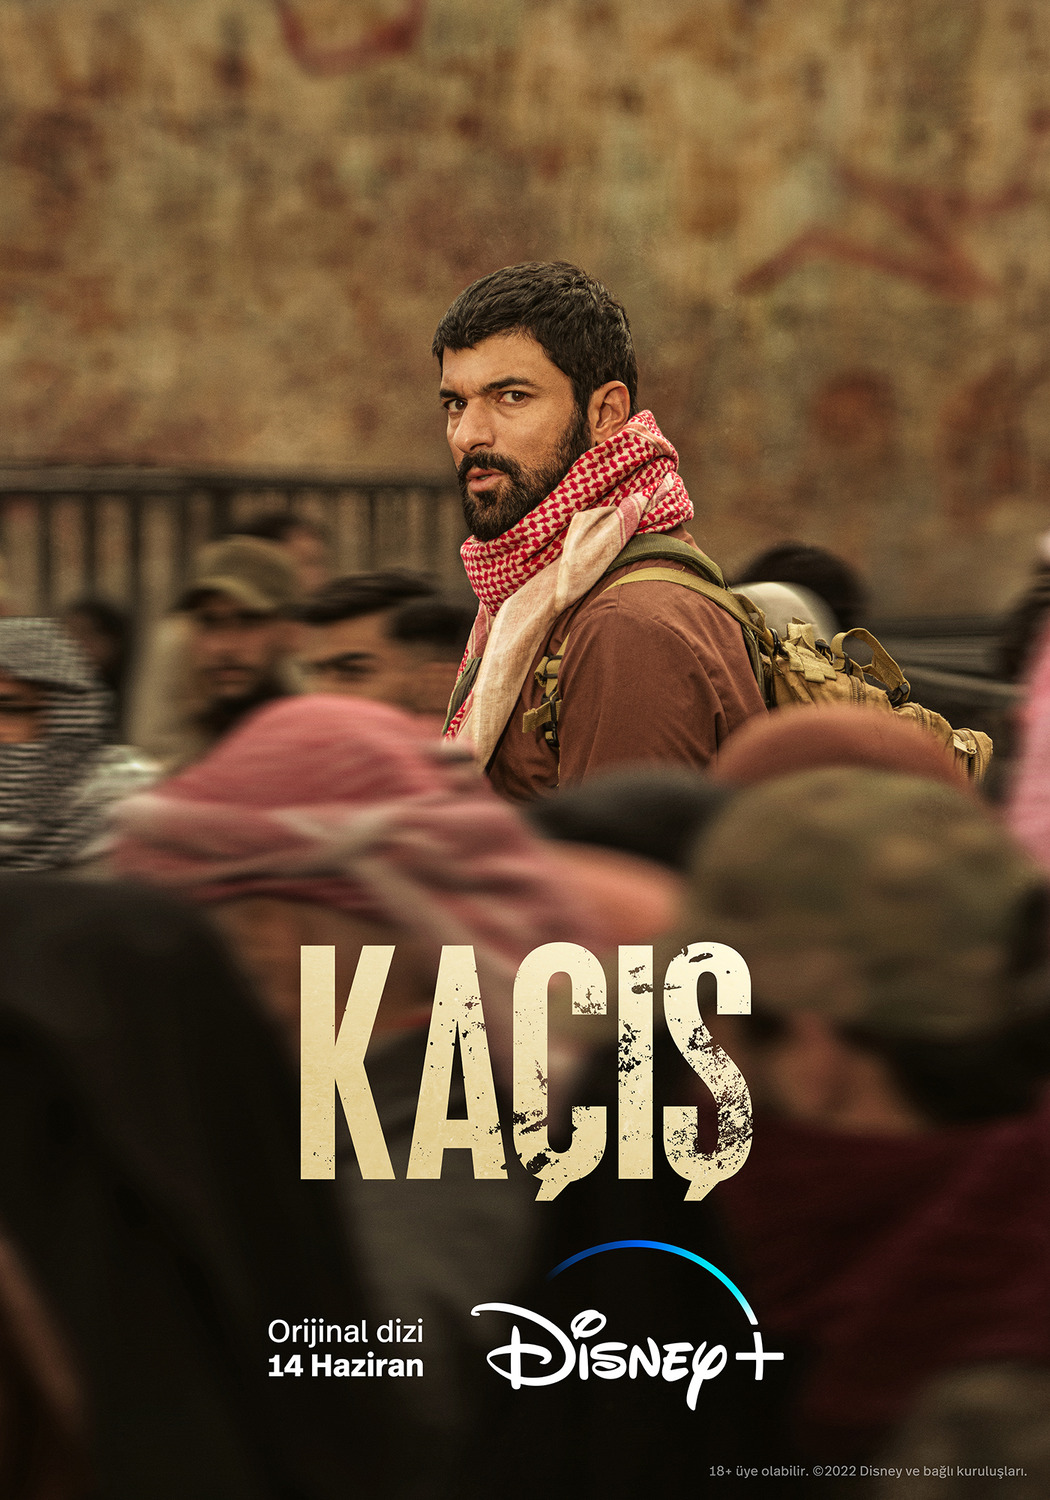 Extra Large TV Poster Image for Kaçis (#4 of 14)